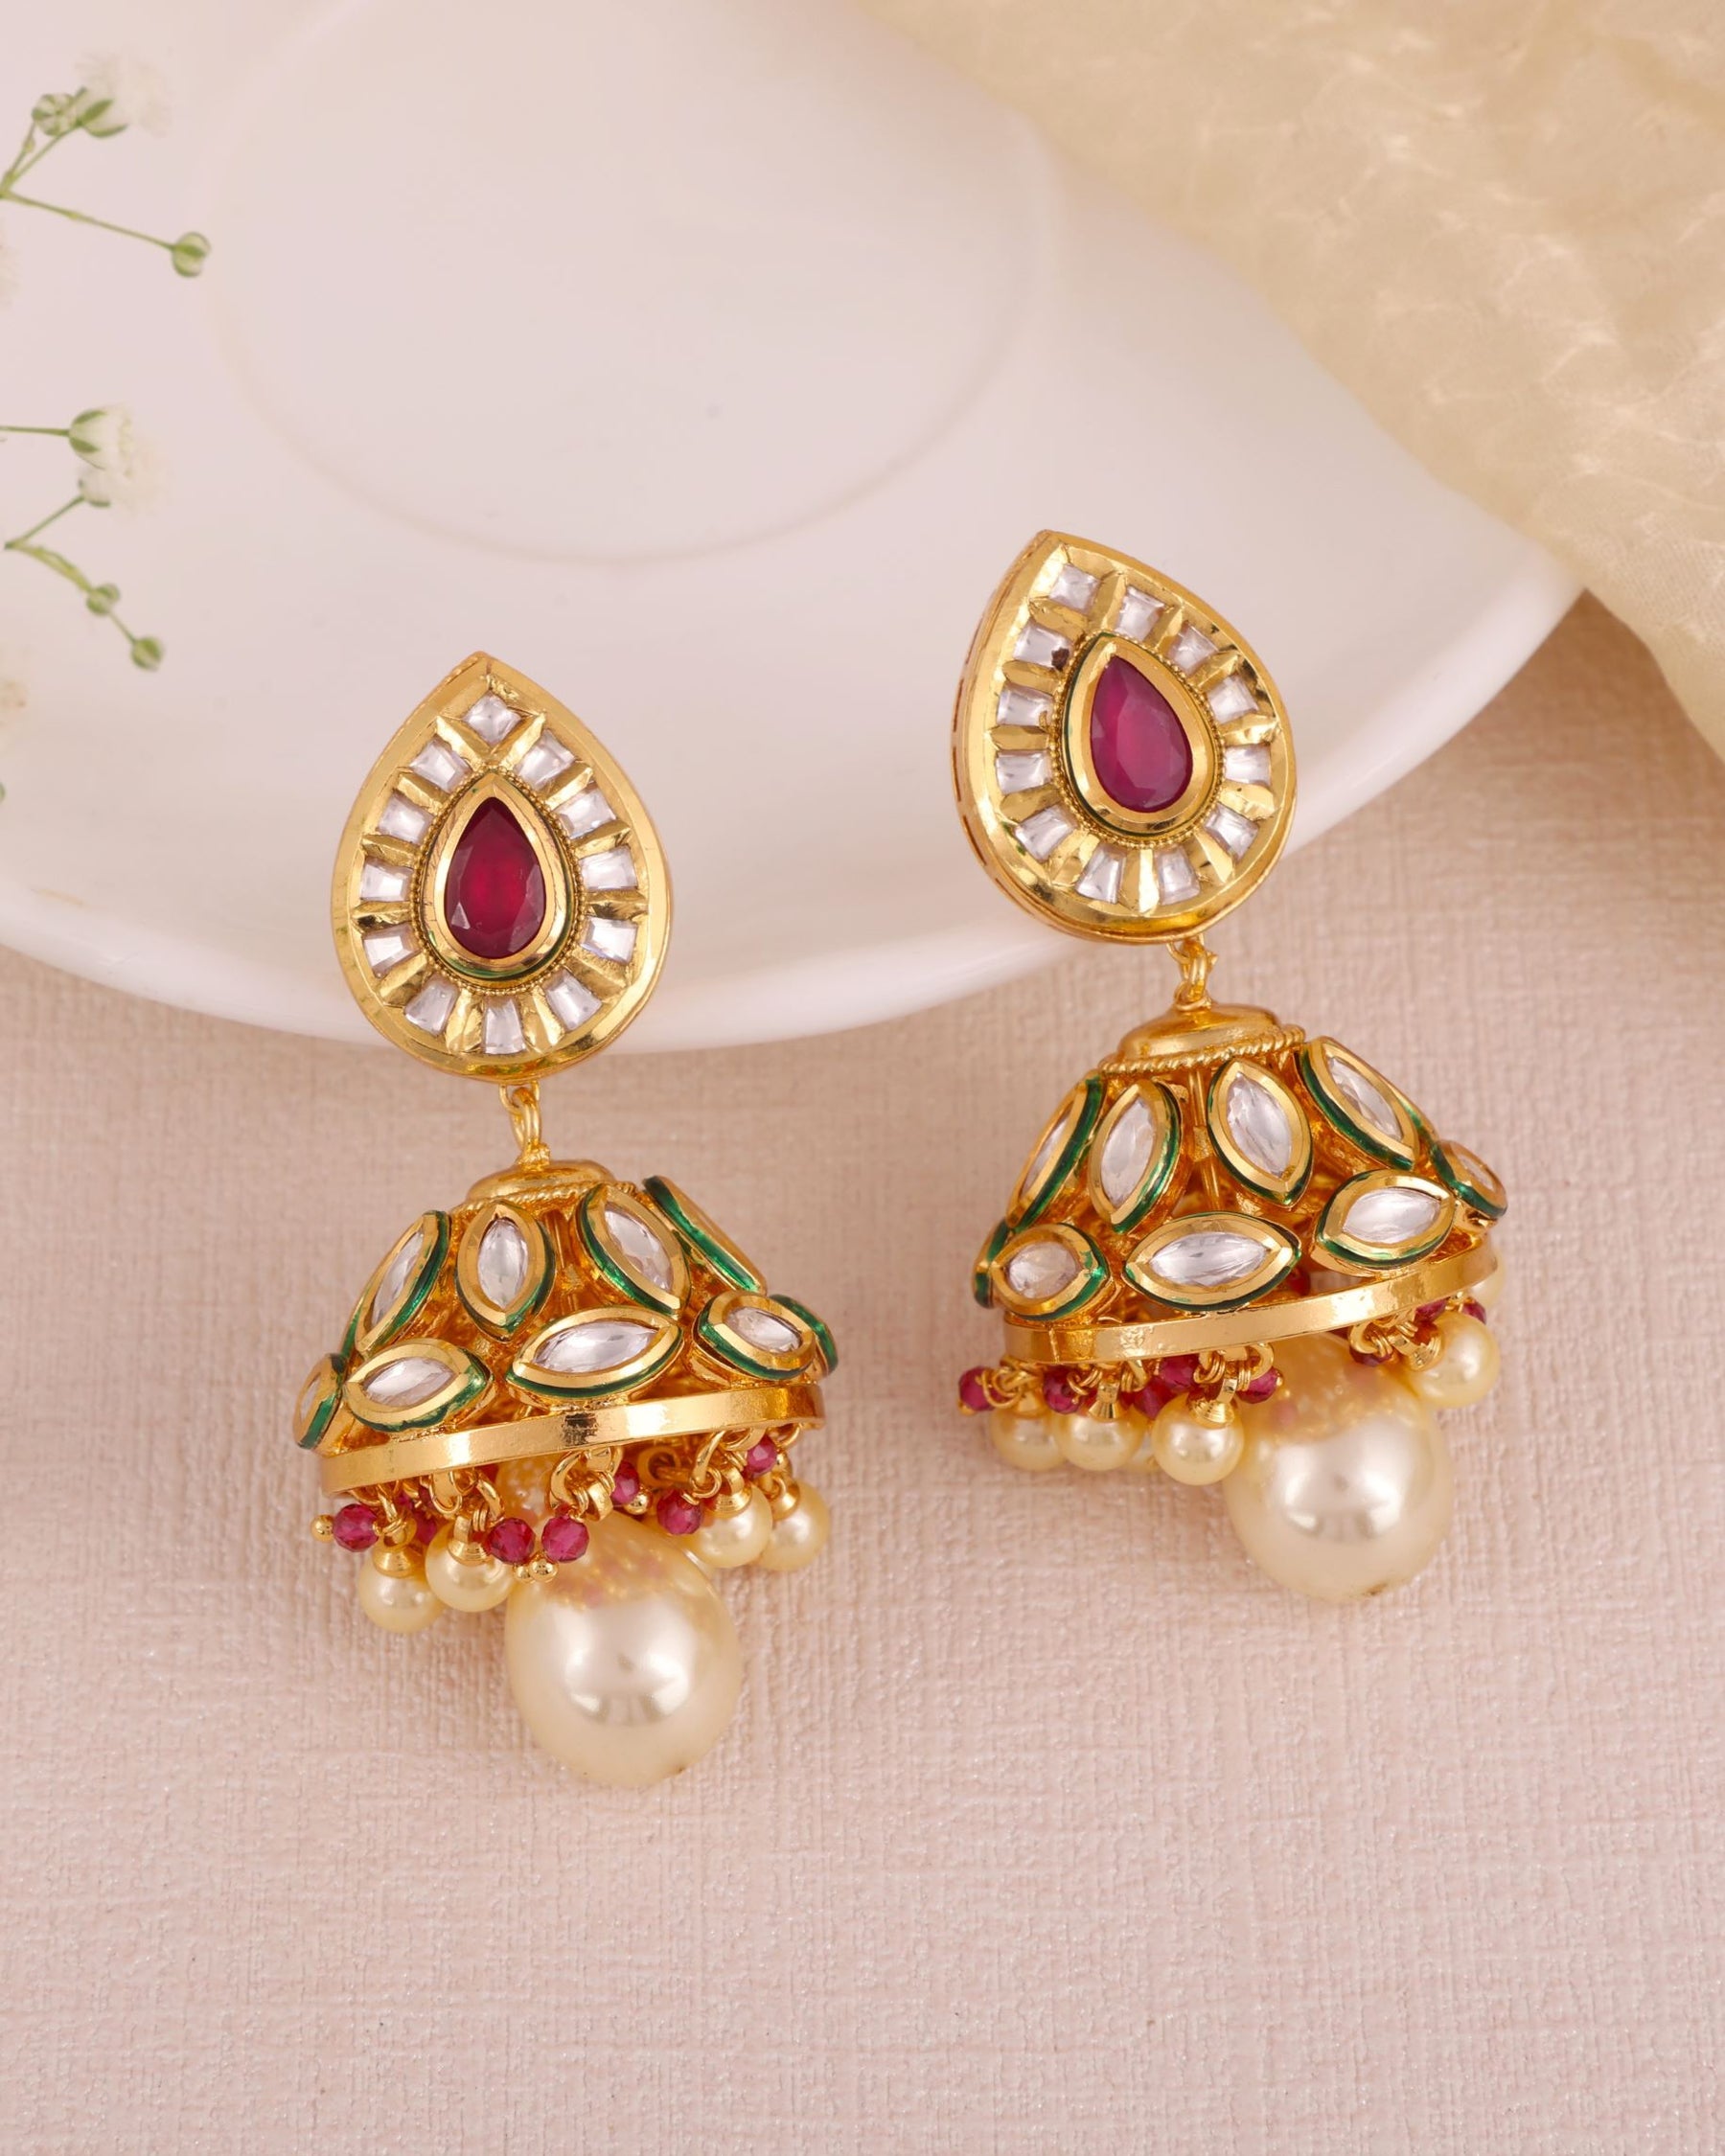 Buy Kundan Chandbali And Pearls Earrings Online Cheap Jhumka Earrings  Online Shopping Earrings  Shop From The Latest Collection Of Earrings For  Women  Girls Online Buy Studs Ear Cuff Drop 